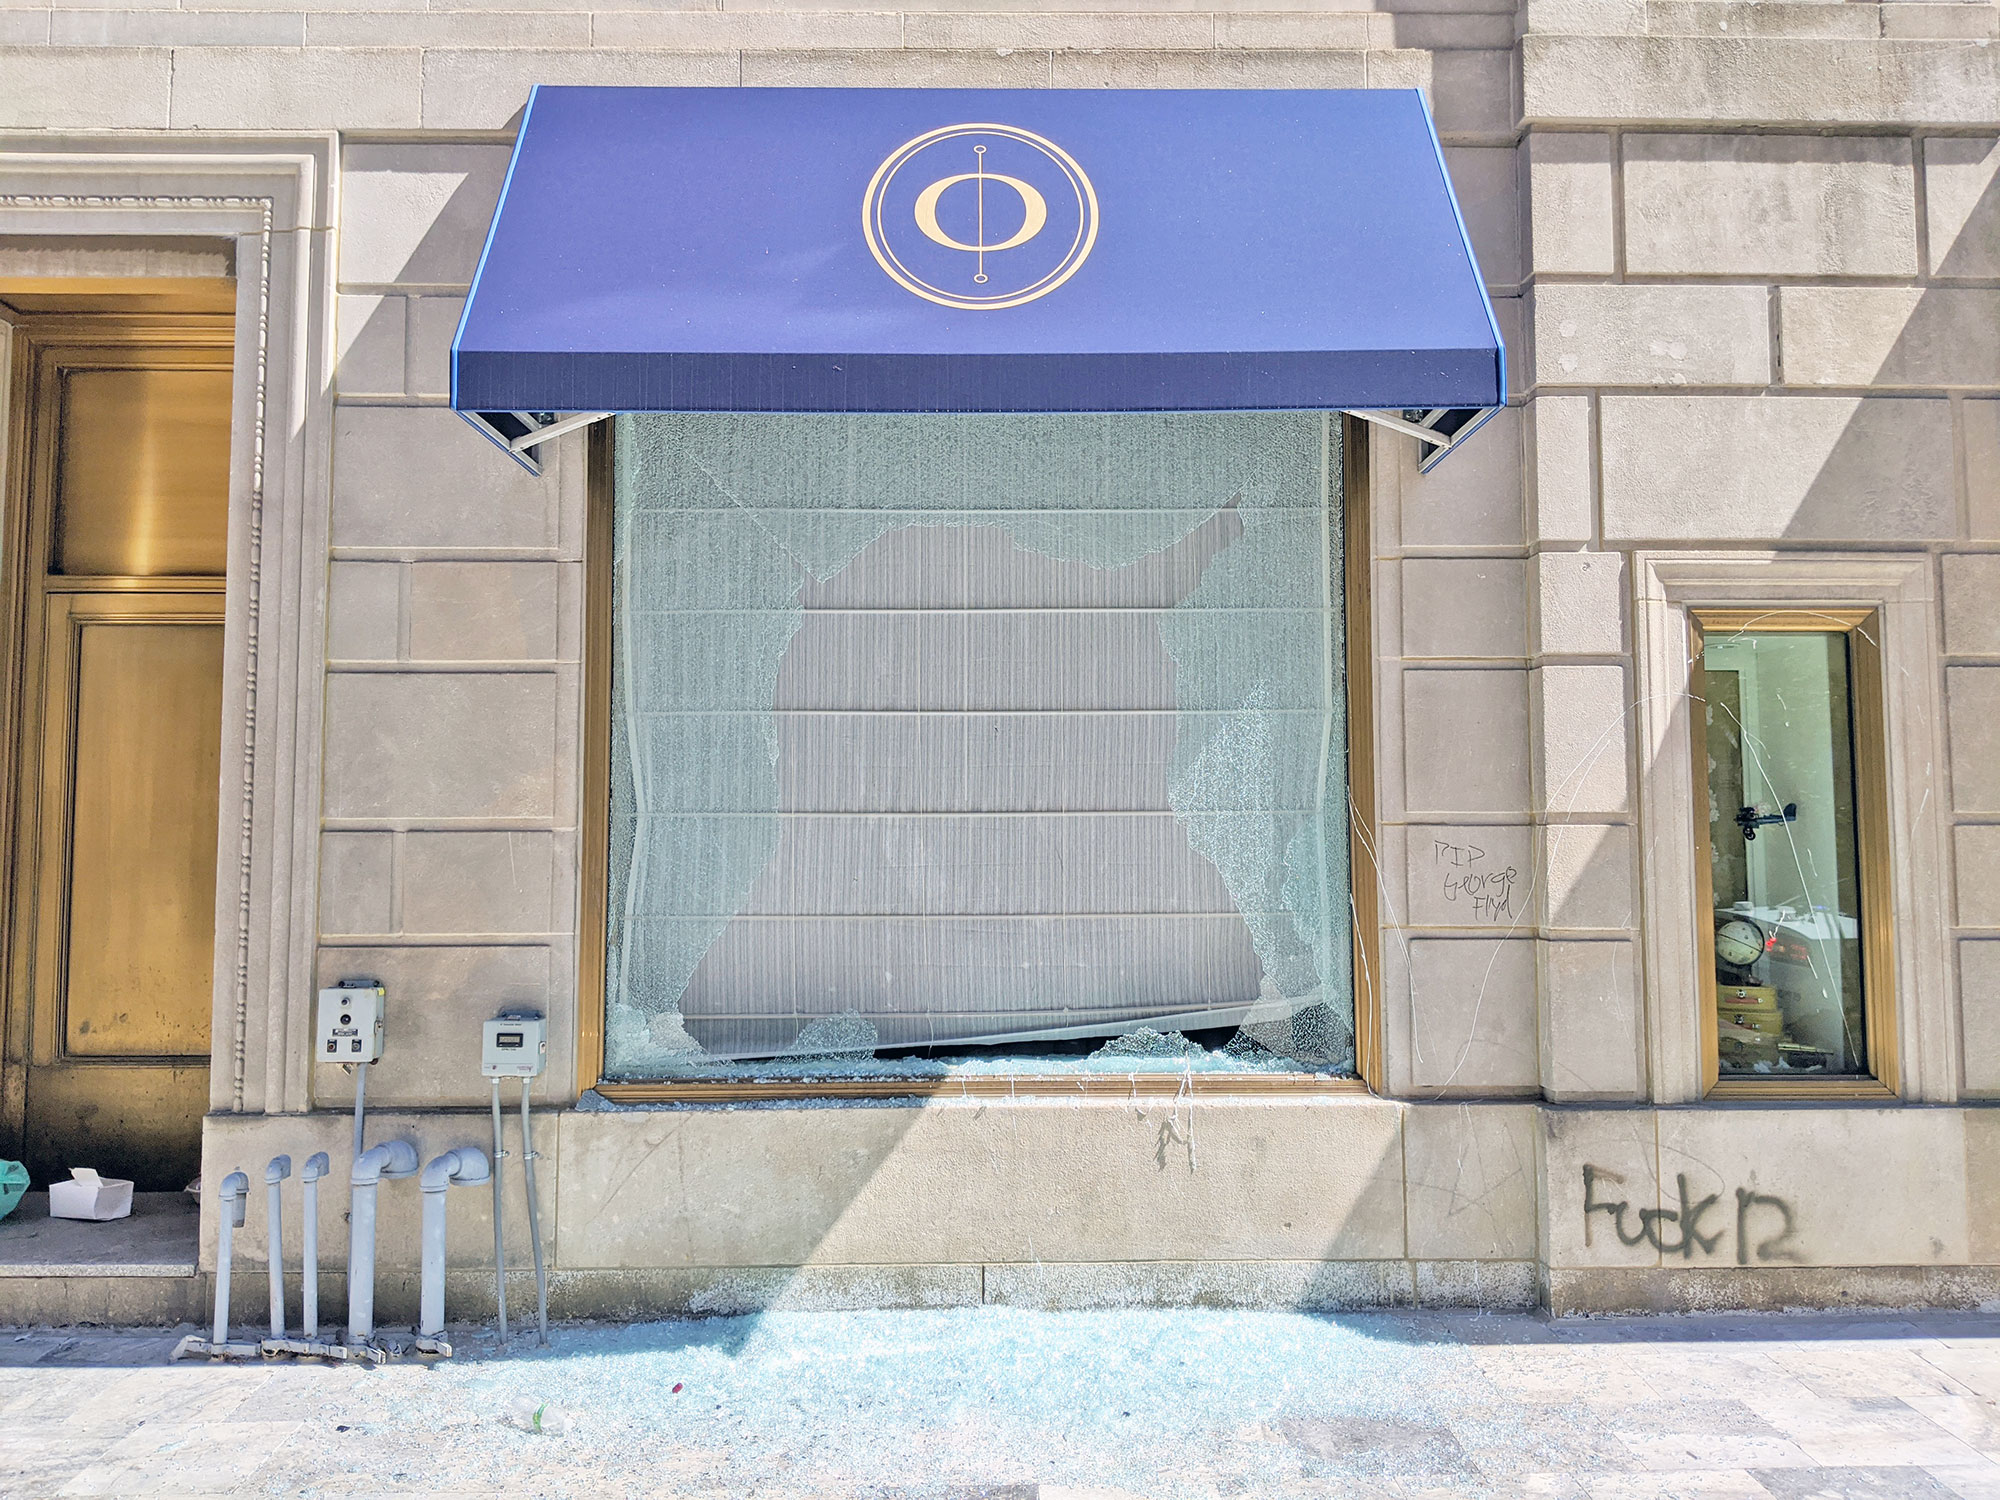 Opaline restaurant with windows destroyed by the George Floyd protest in downtown Washington D.C.